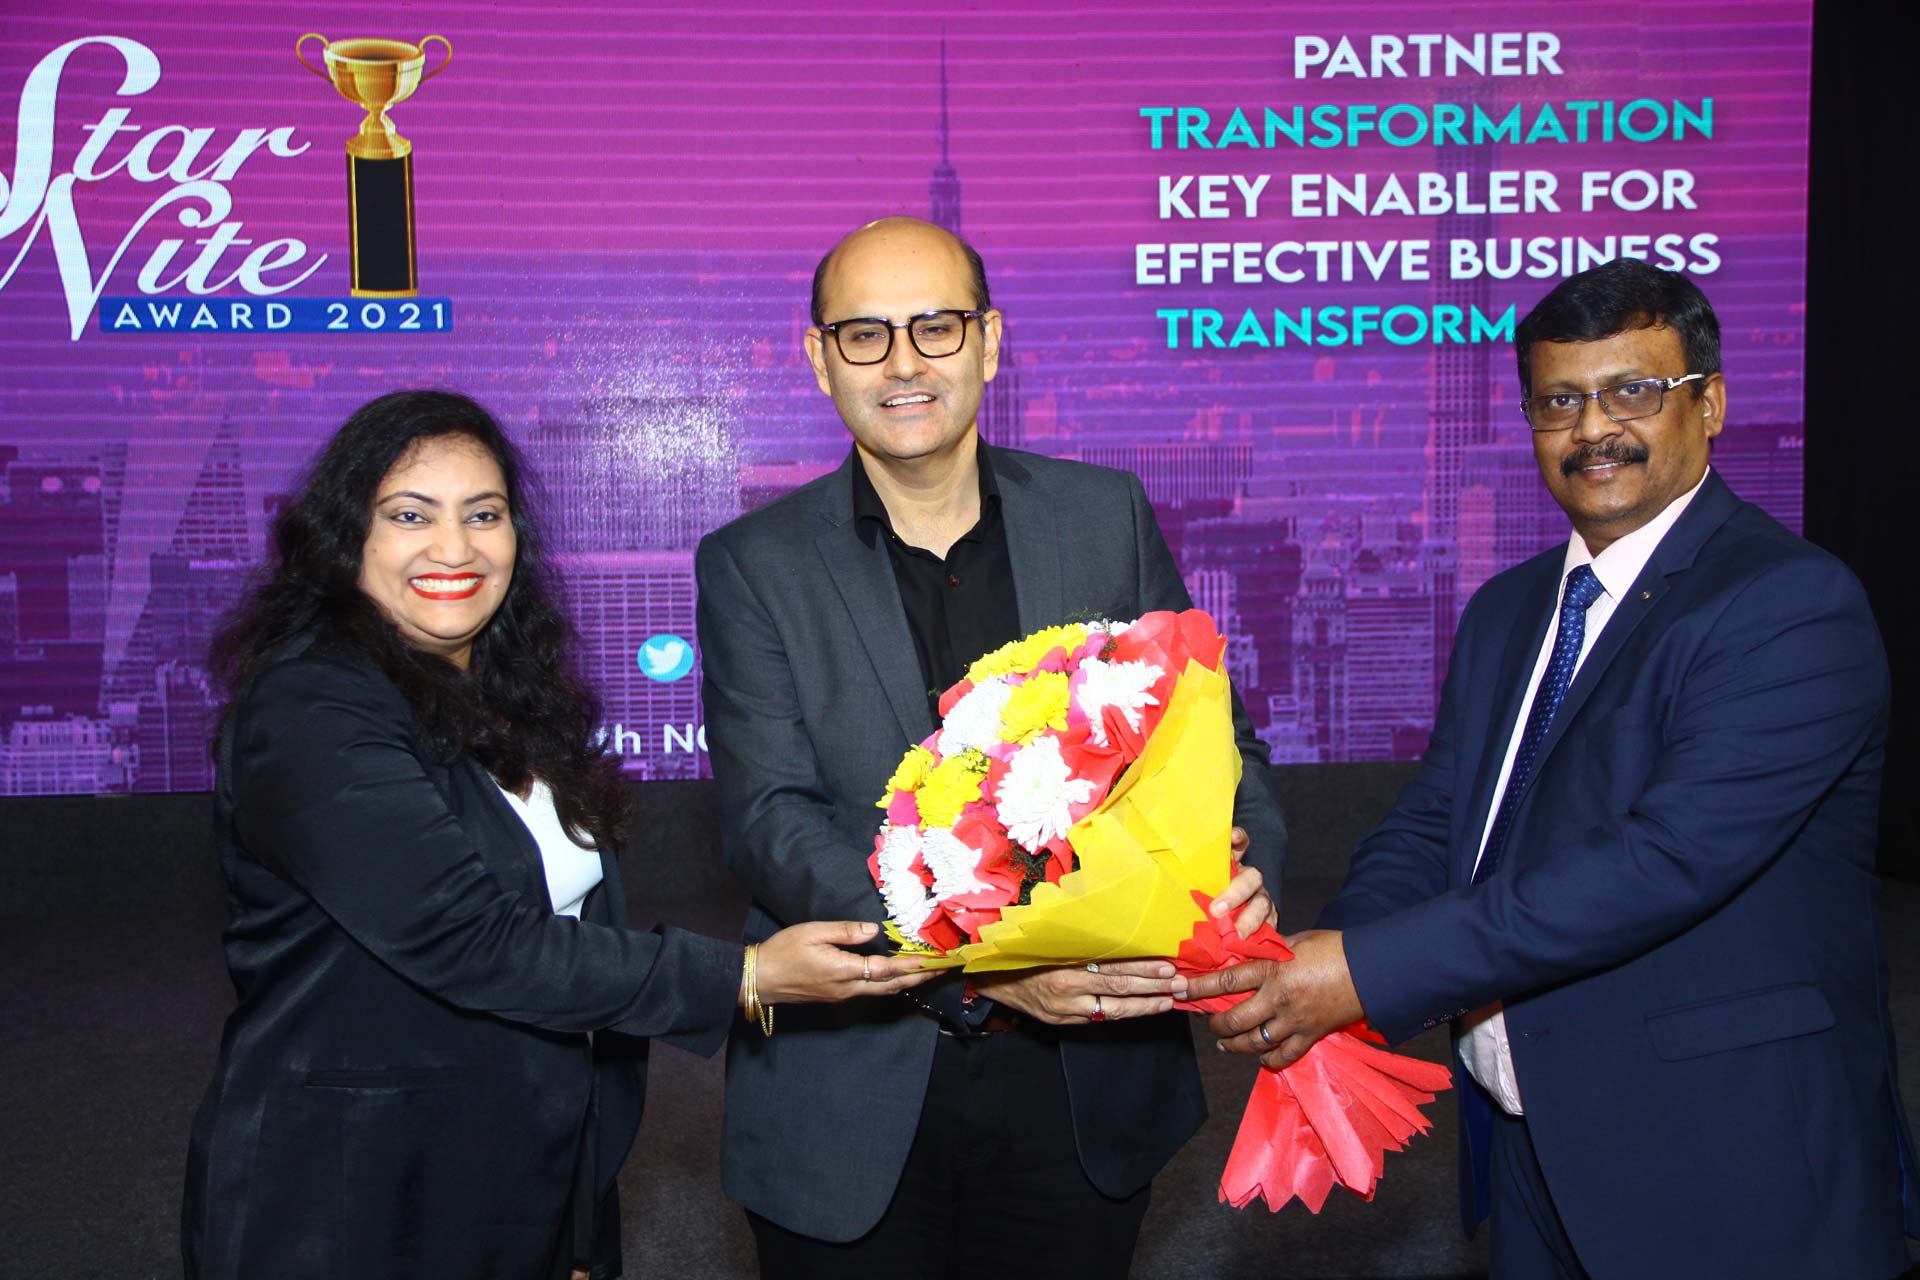 Welcoming Mr. Anil Sethi, Vice President & General Manager- Channels India, Dell Technologies at 20th Star Nite Awards 2021